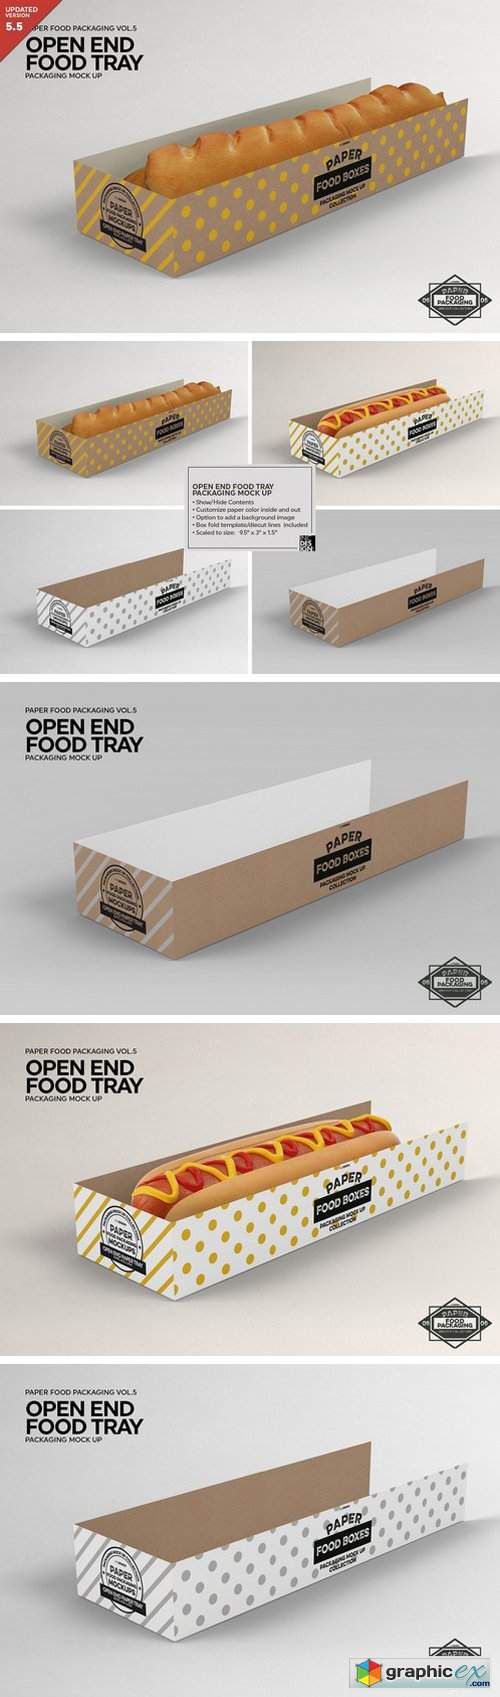 Open End Food Tray Packaging Mockup